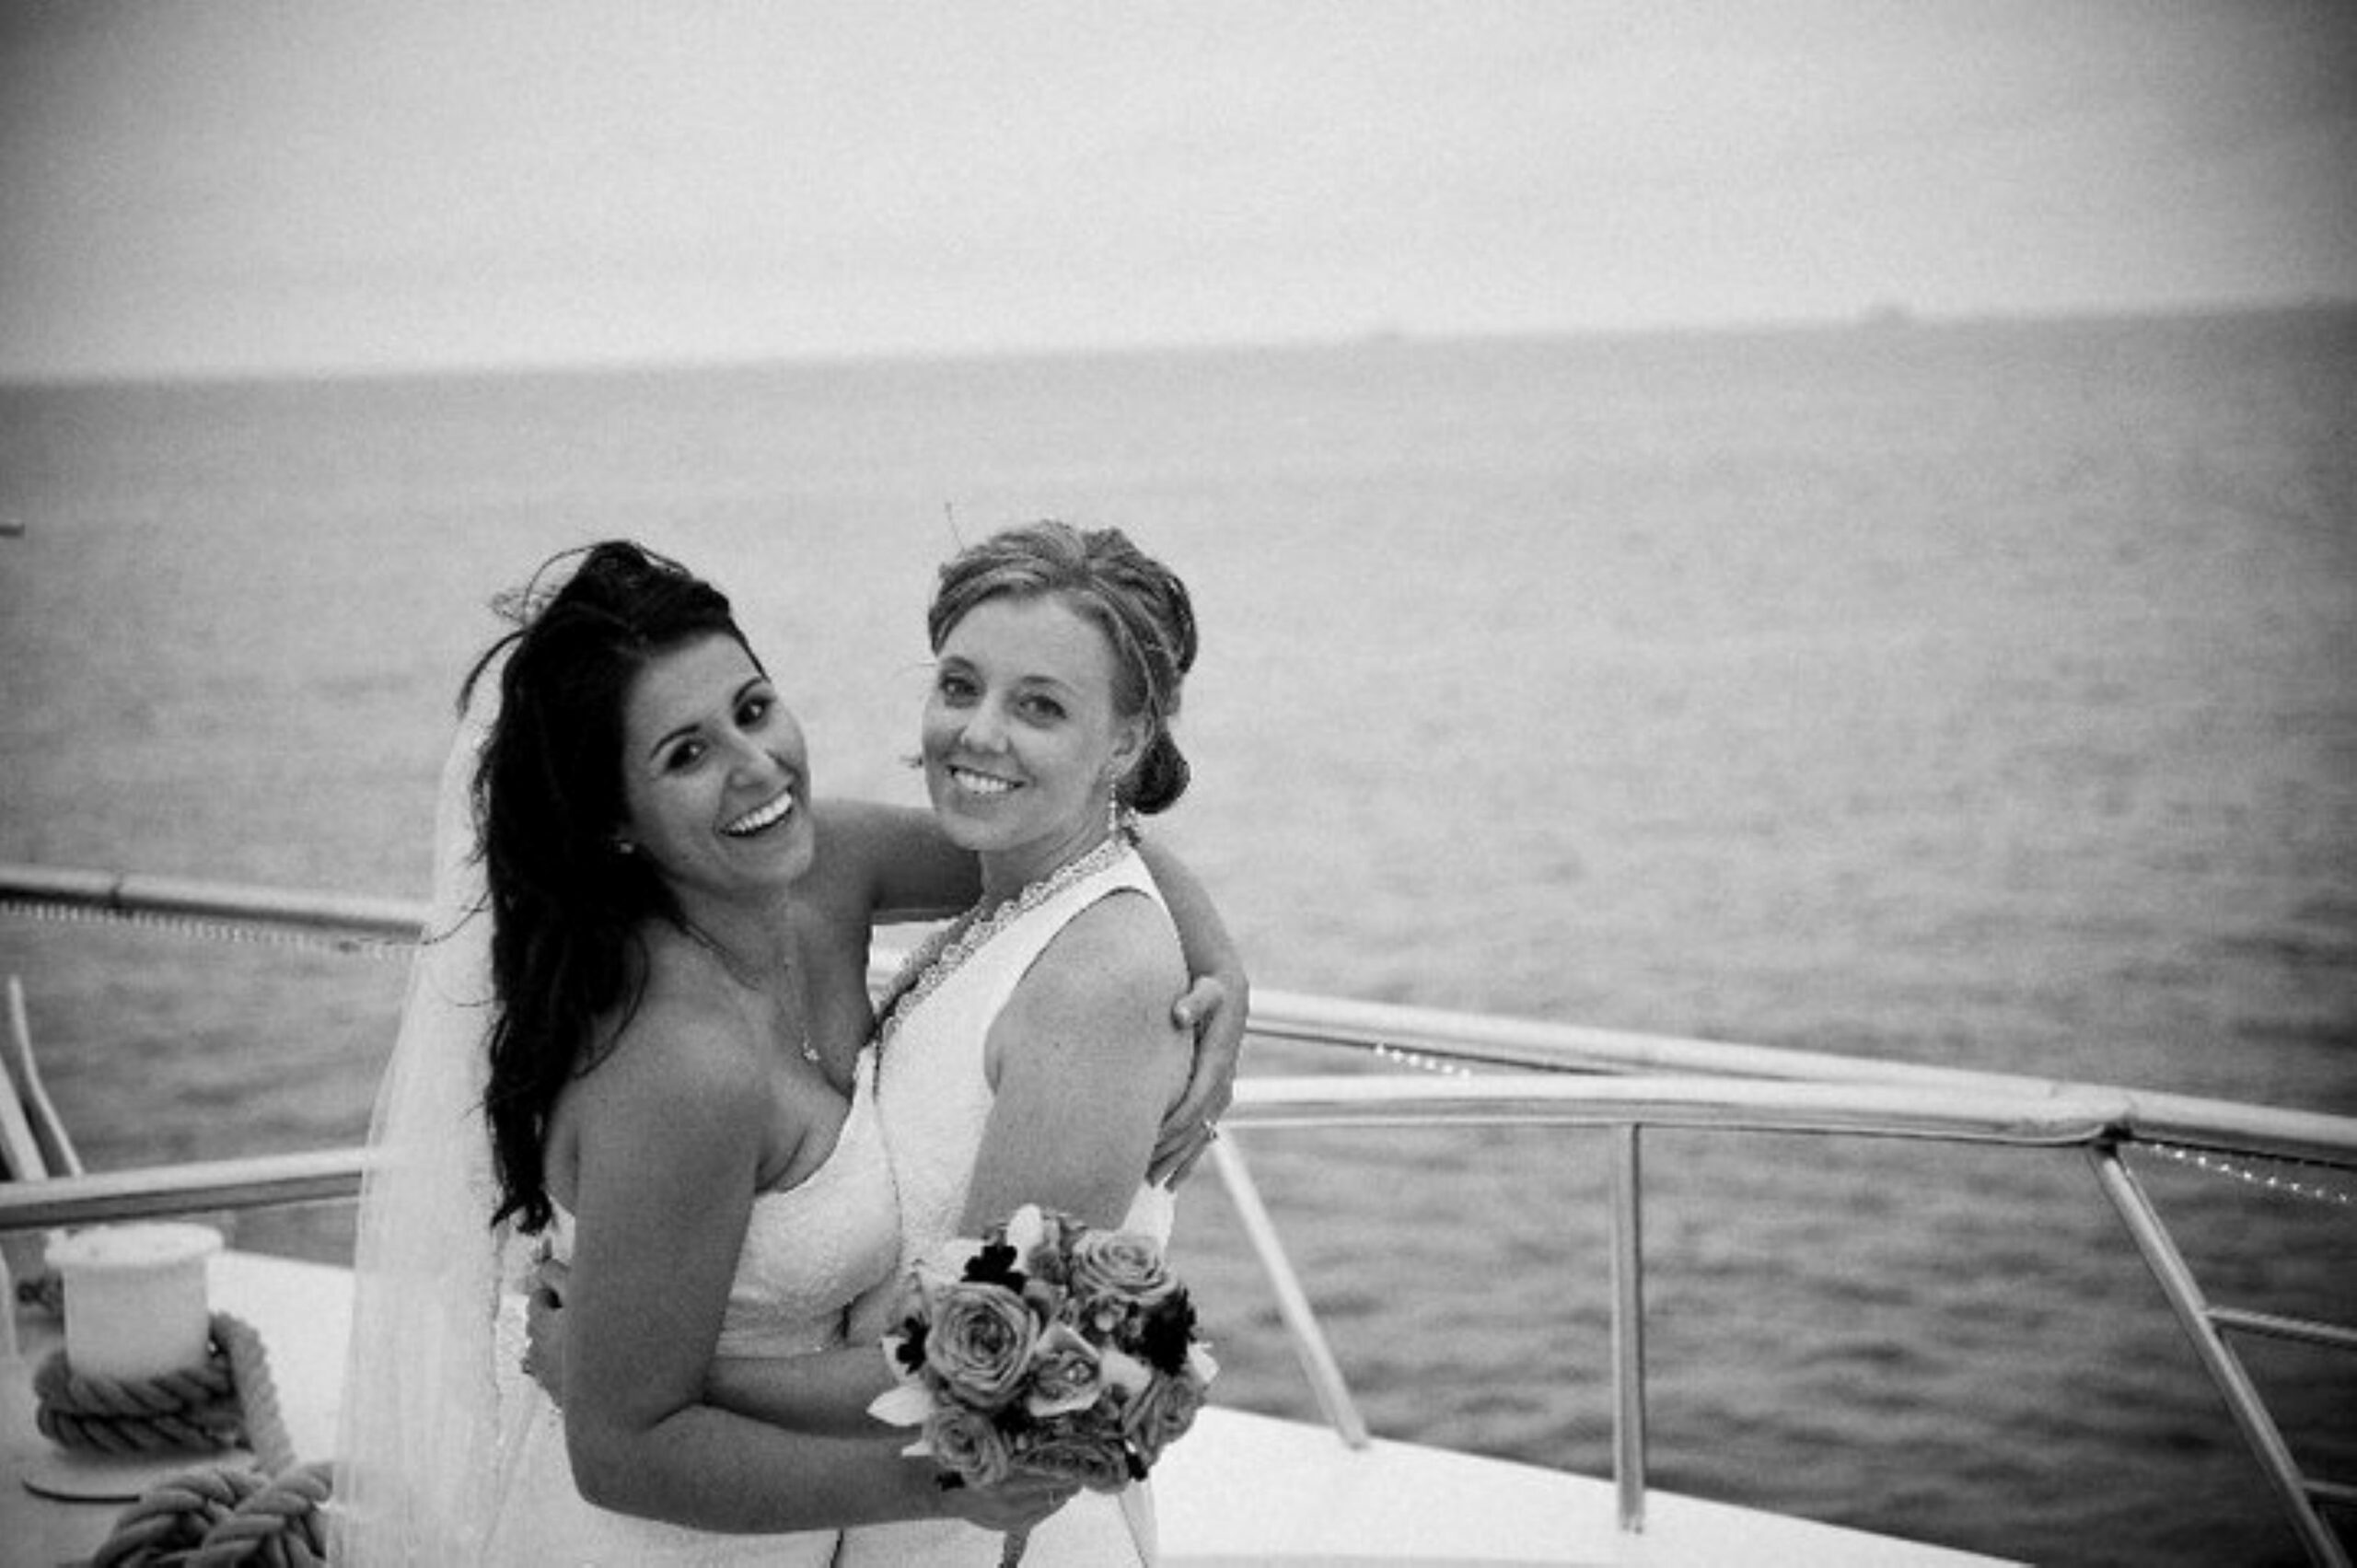 crew member amber cross and wife hugging on endless dreams wedding
